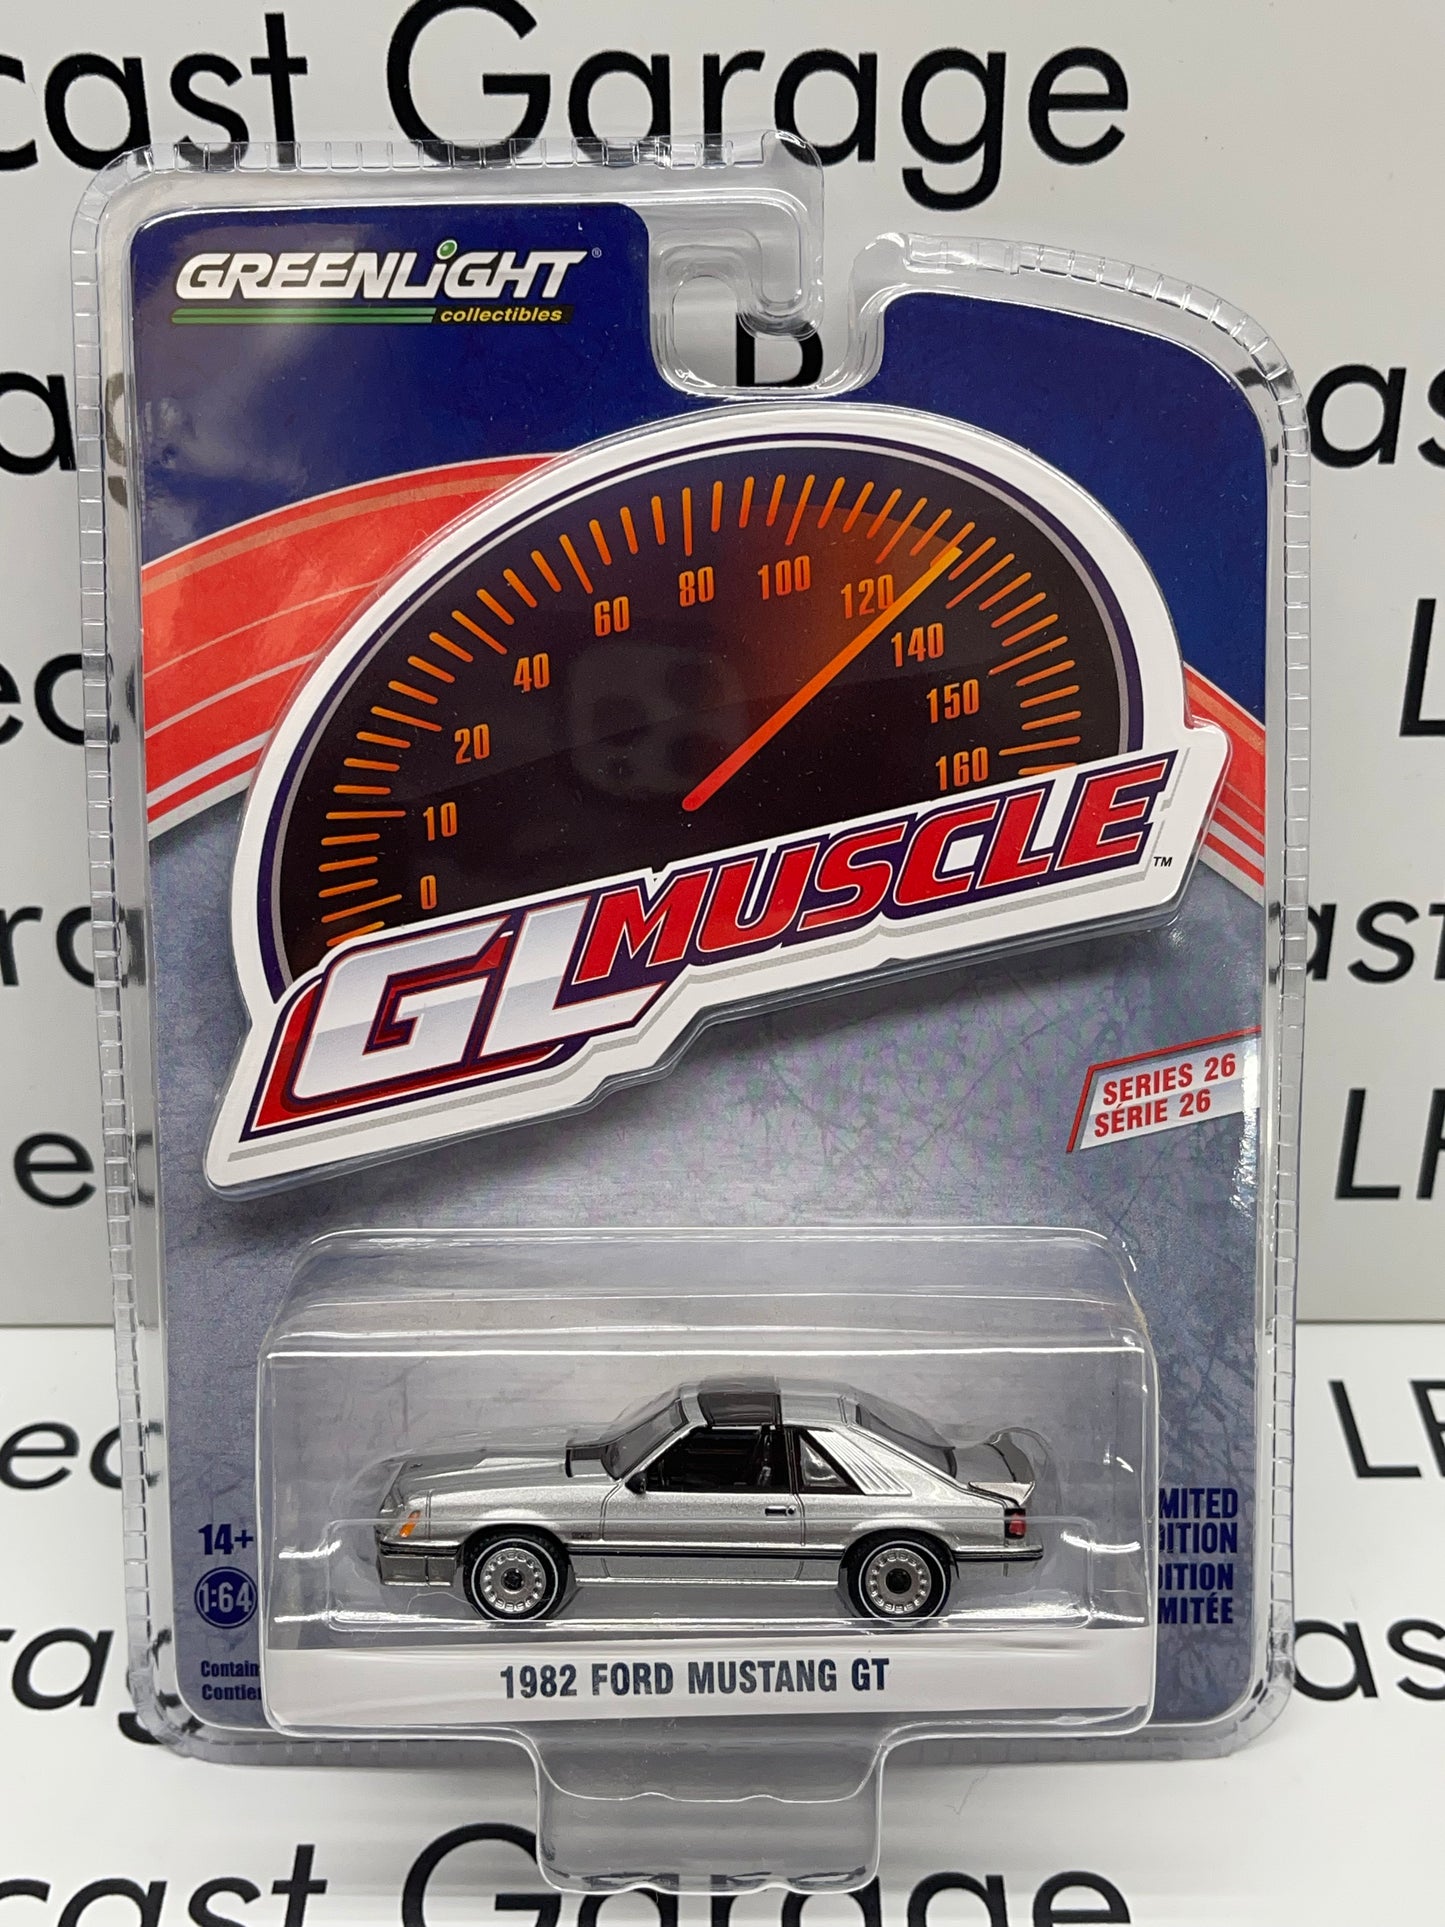 GREENLIGHT 1982 Ford Mustang GT Silver "GL Muscle" 1:64 Diecast